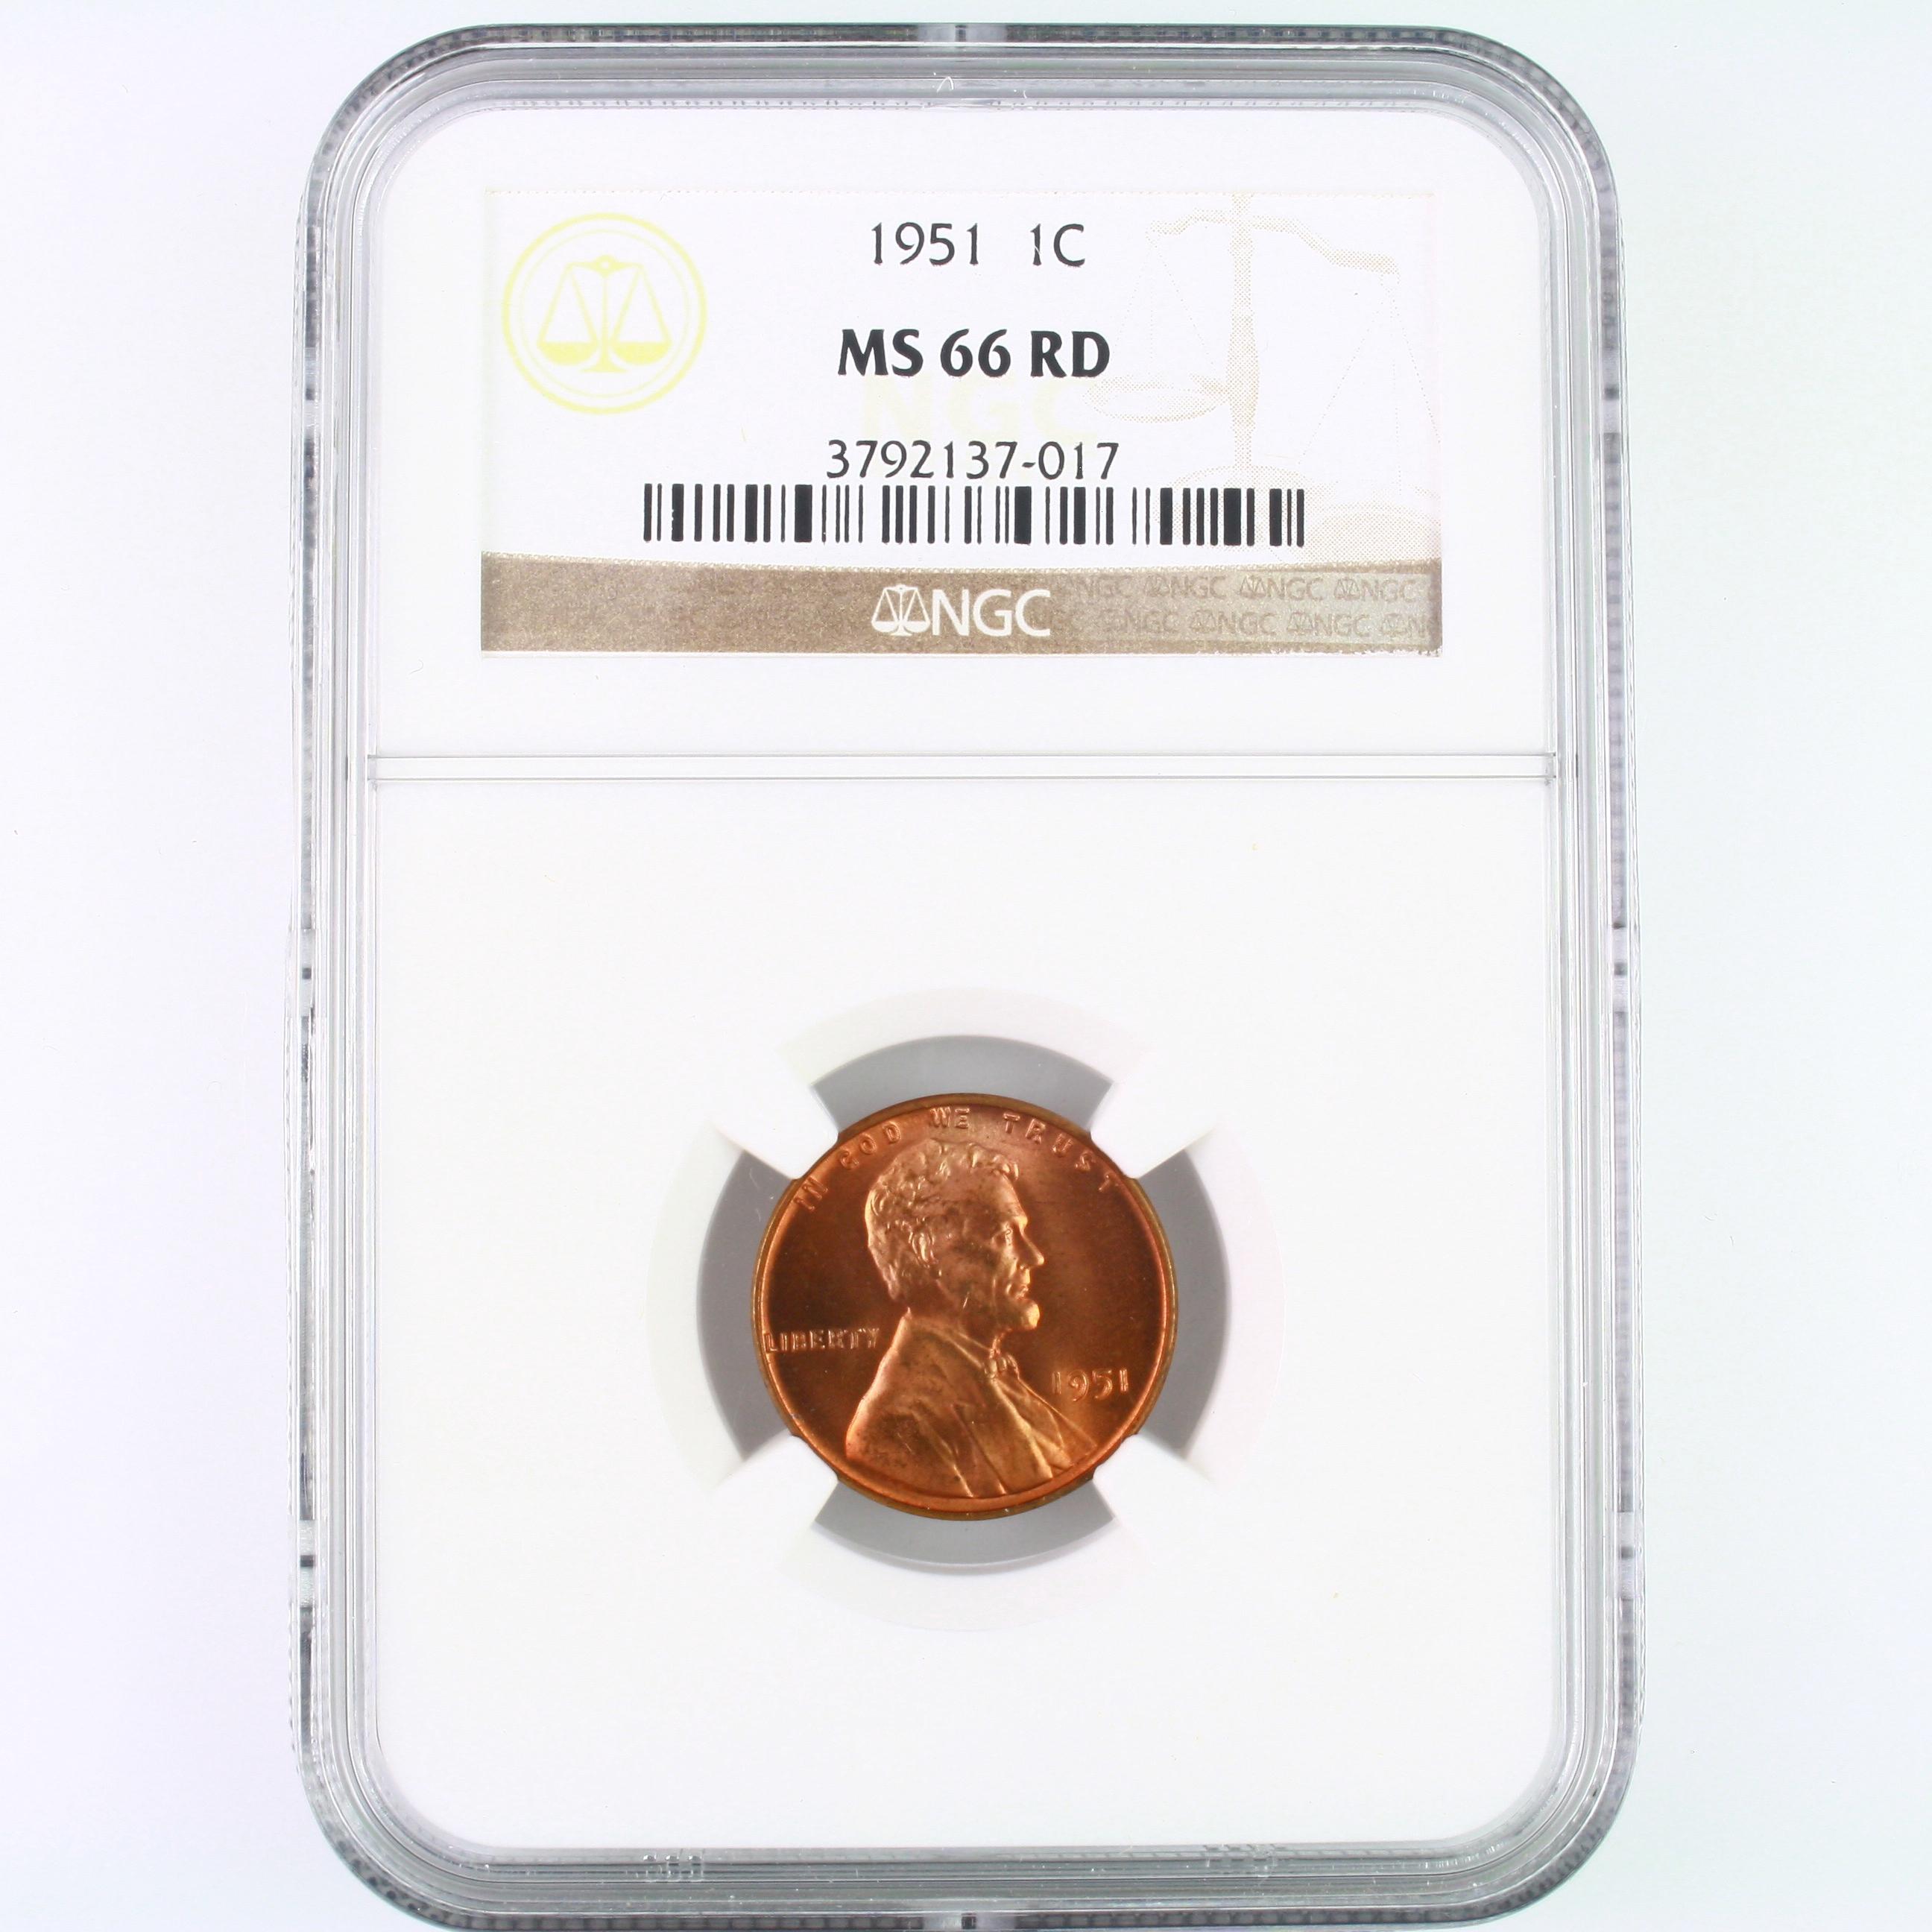 Certified 1951 U.S. Lincoln cent